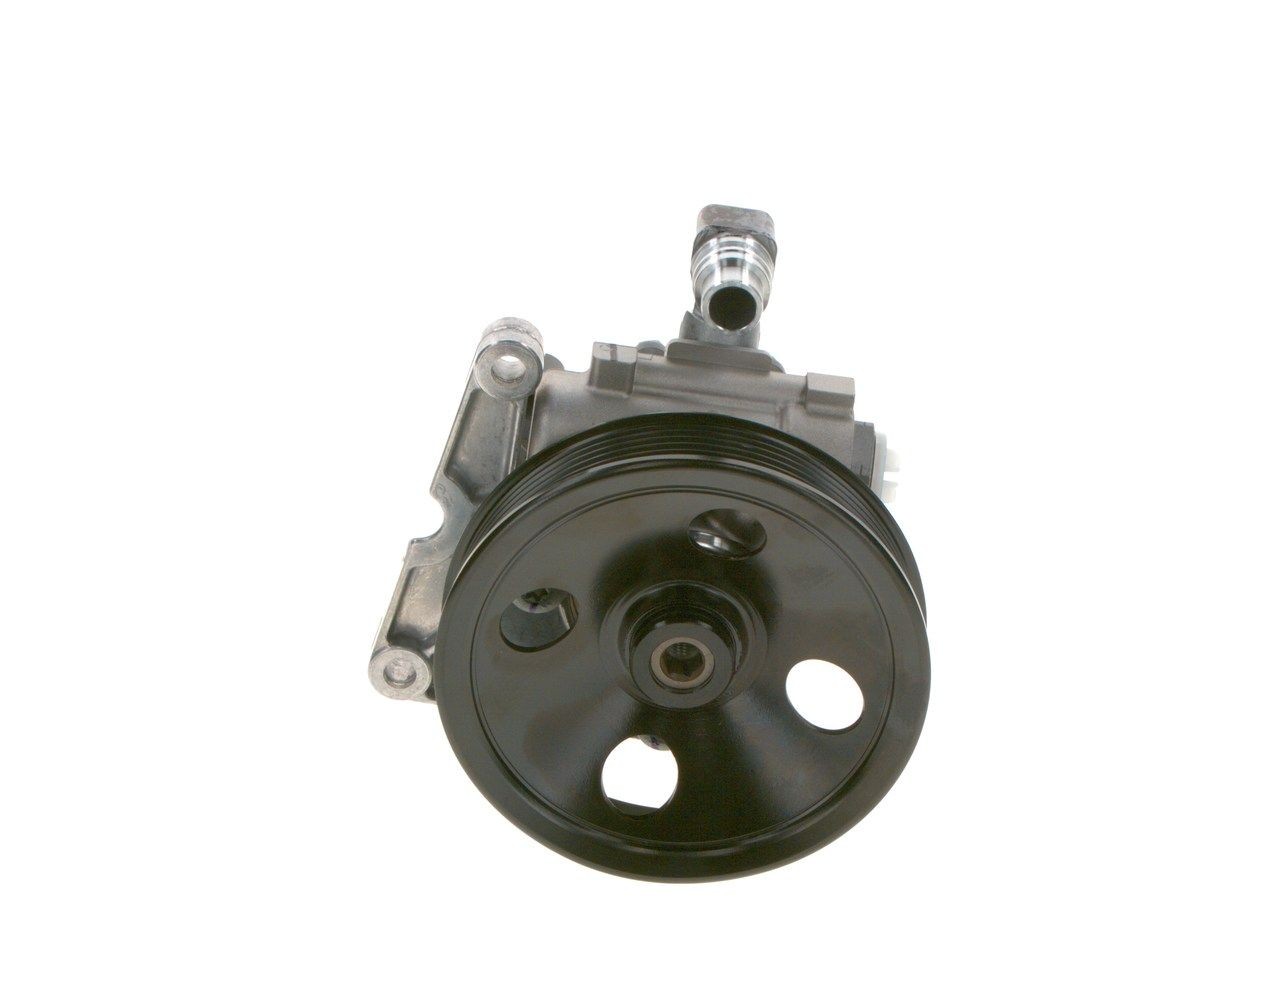 BOSCH Hydraulic steering pump K S00 000 679 suitable for MERCEDES-BENZ E-Class